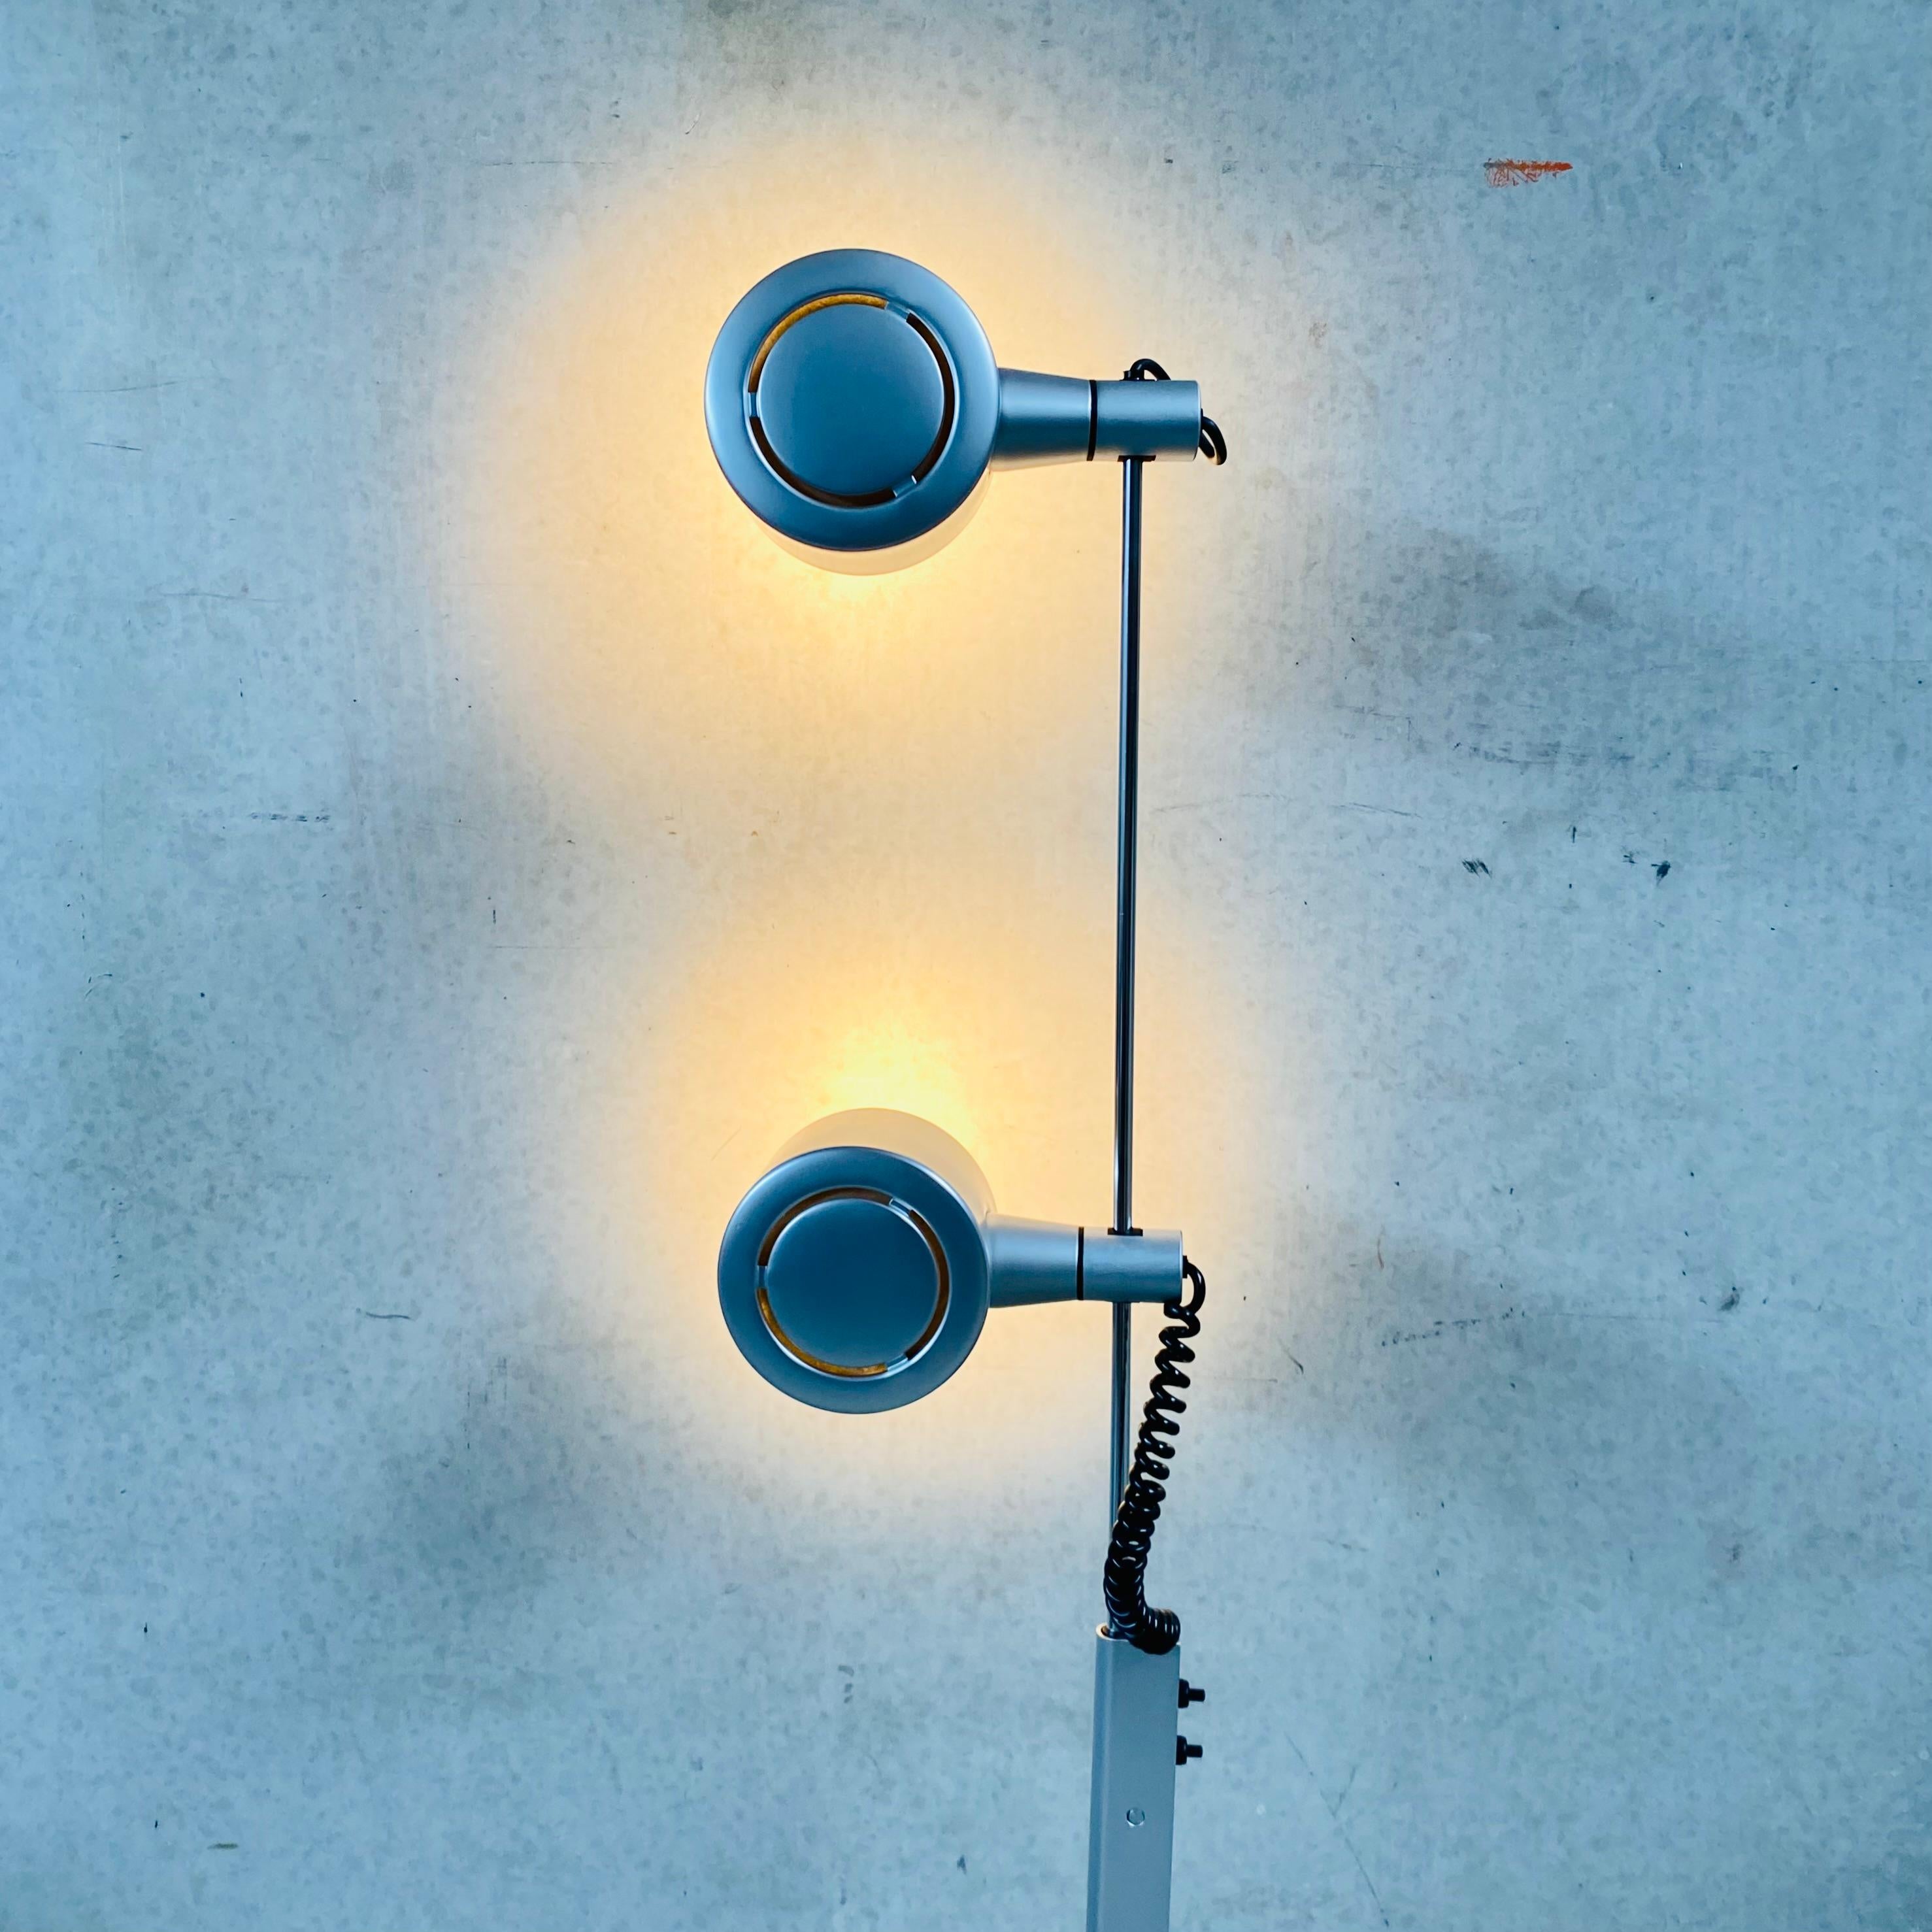 Aluminum QC Twin Spotlicht Floor Lamp by Ronald Homes for Conelicht Limited, UK, 1970s For Sale